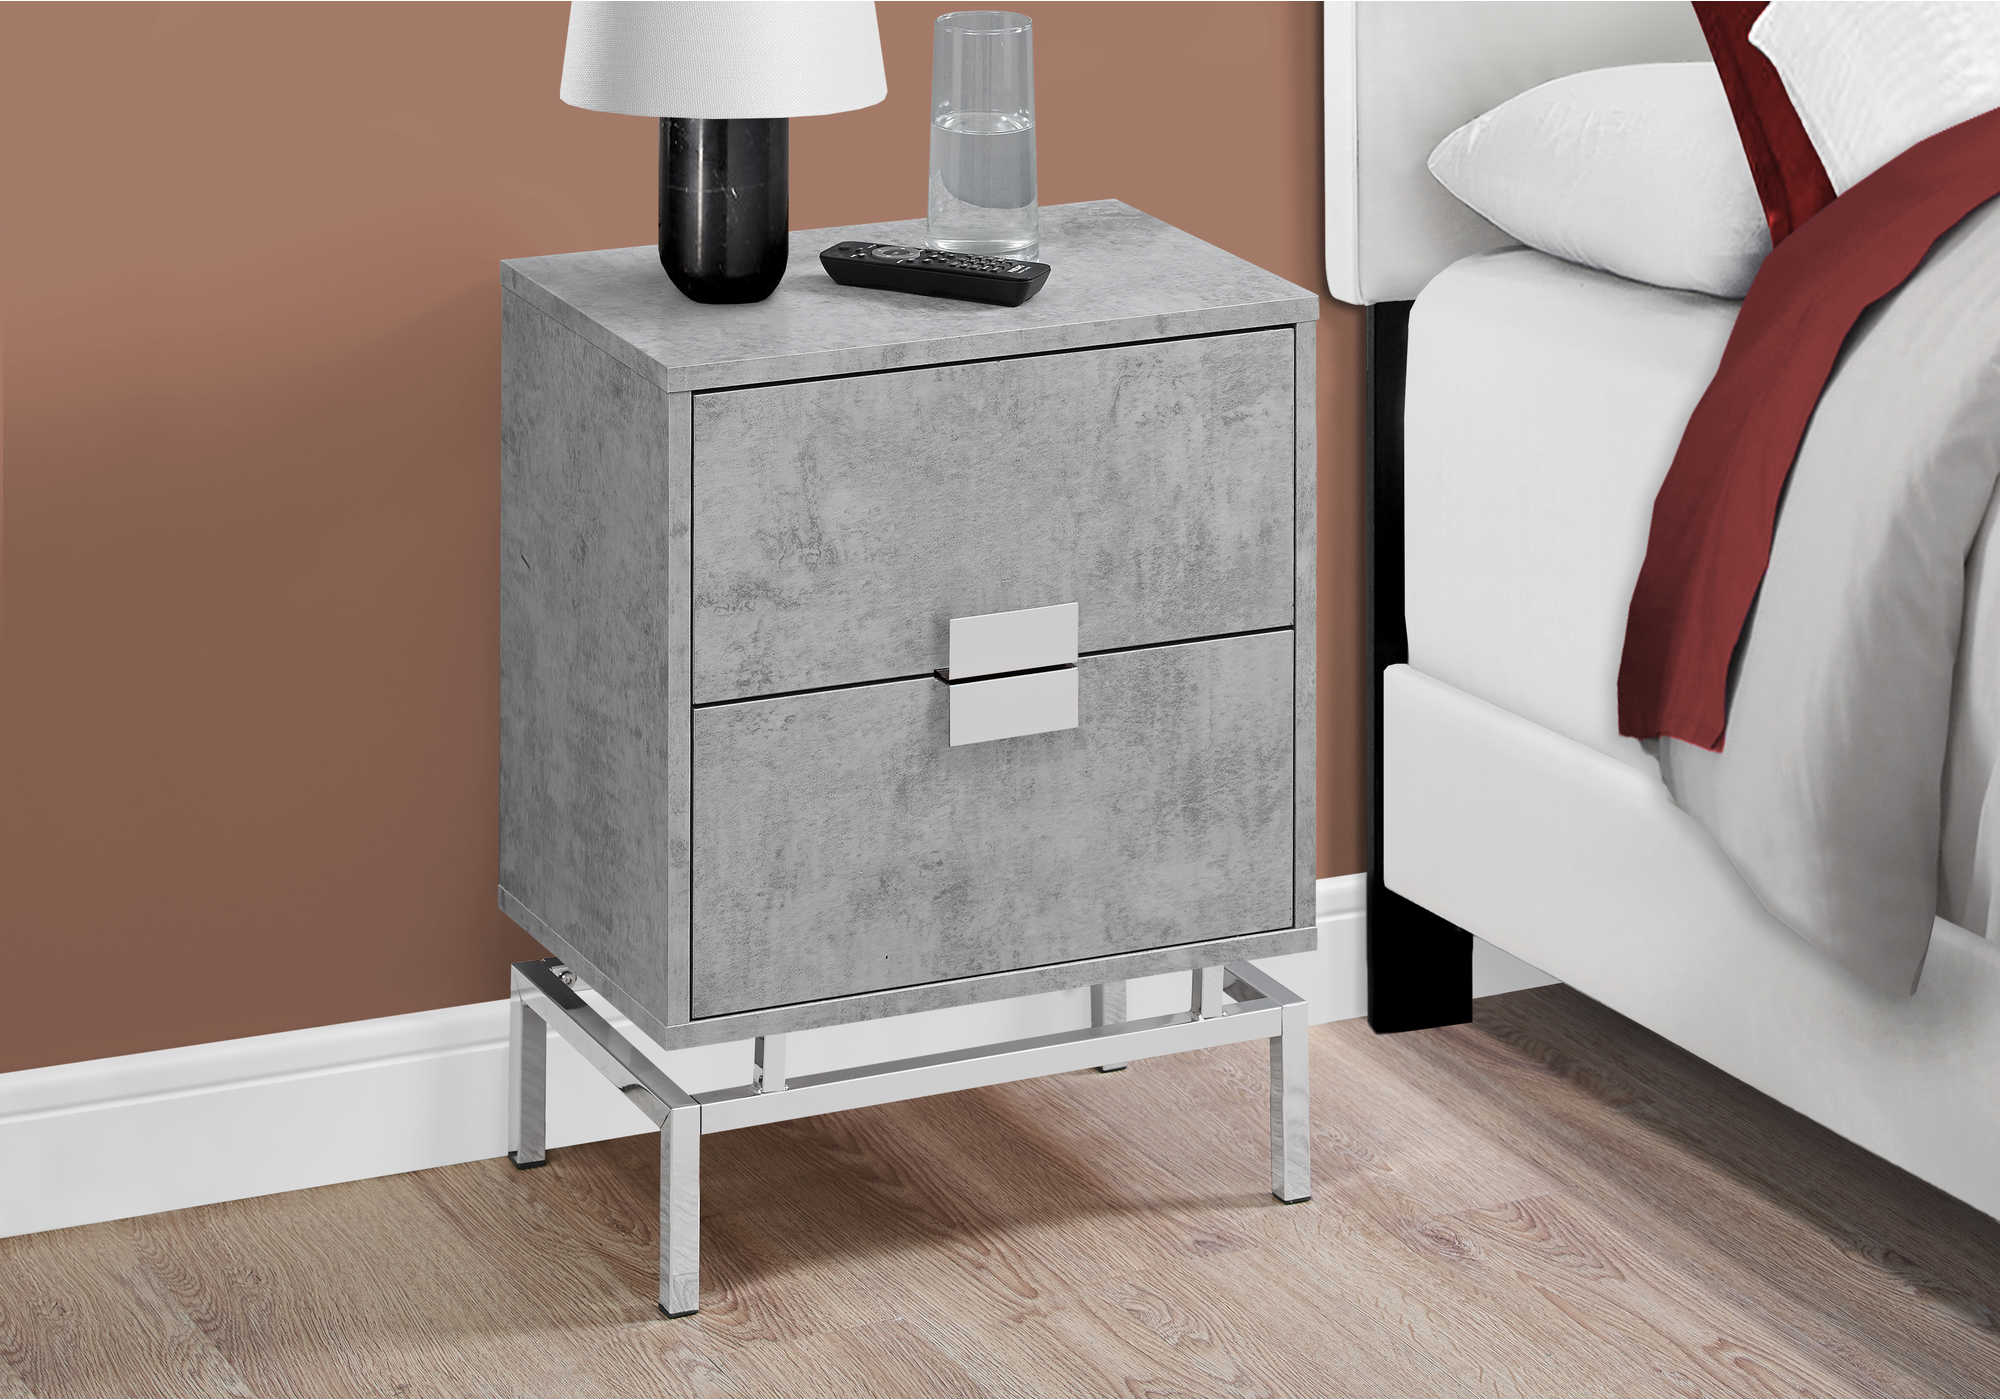 NIGHT STAND - 24"H / GREY CEMENT / CHROME METAL